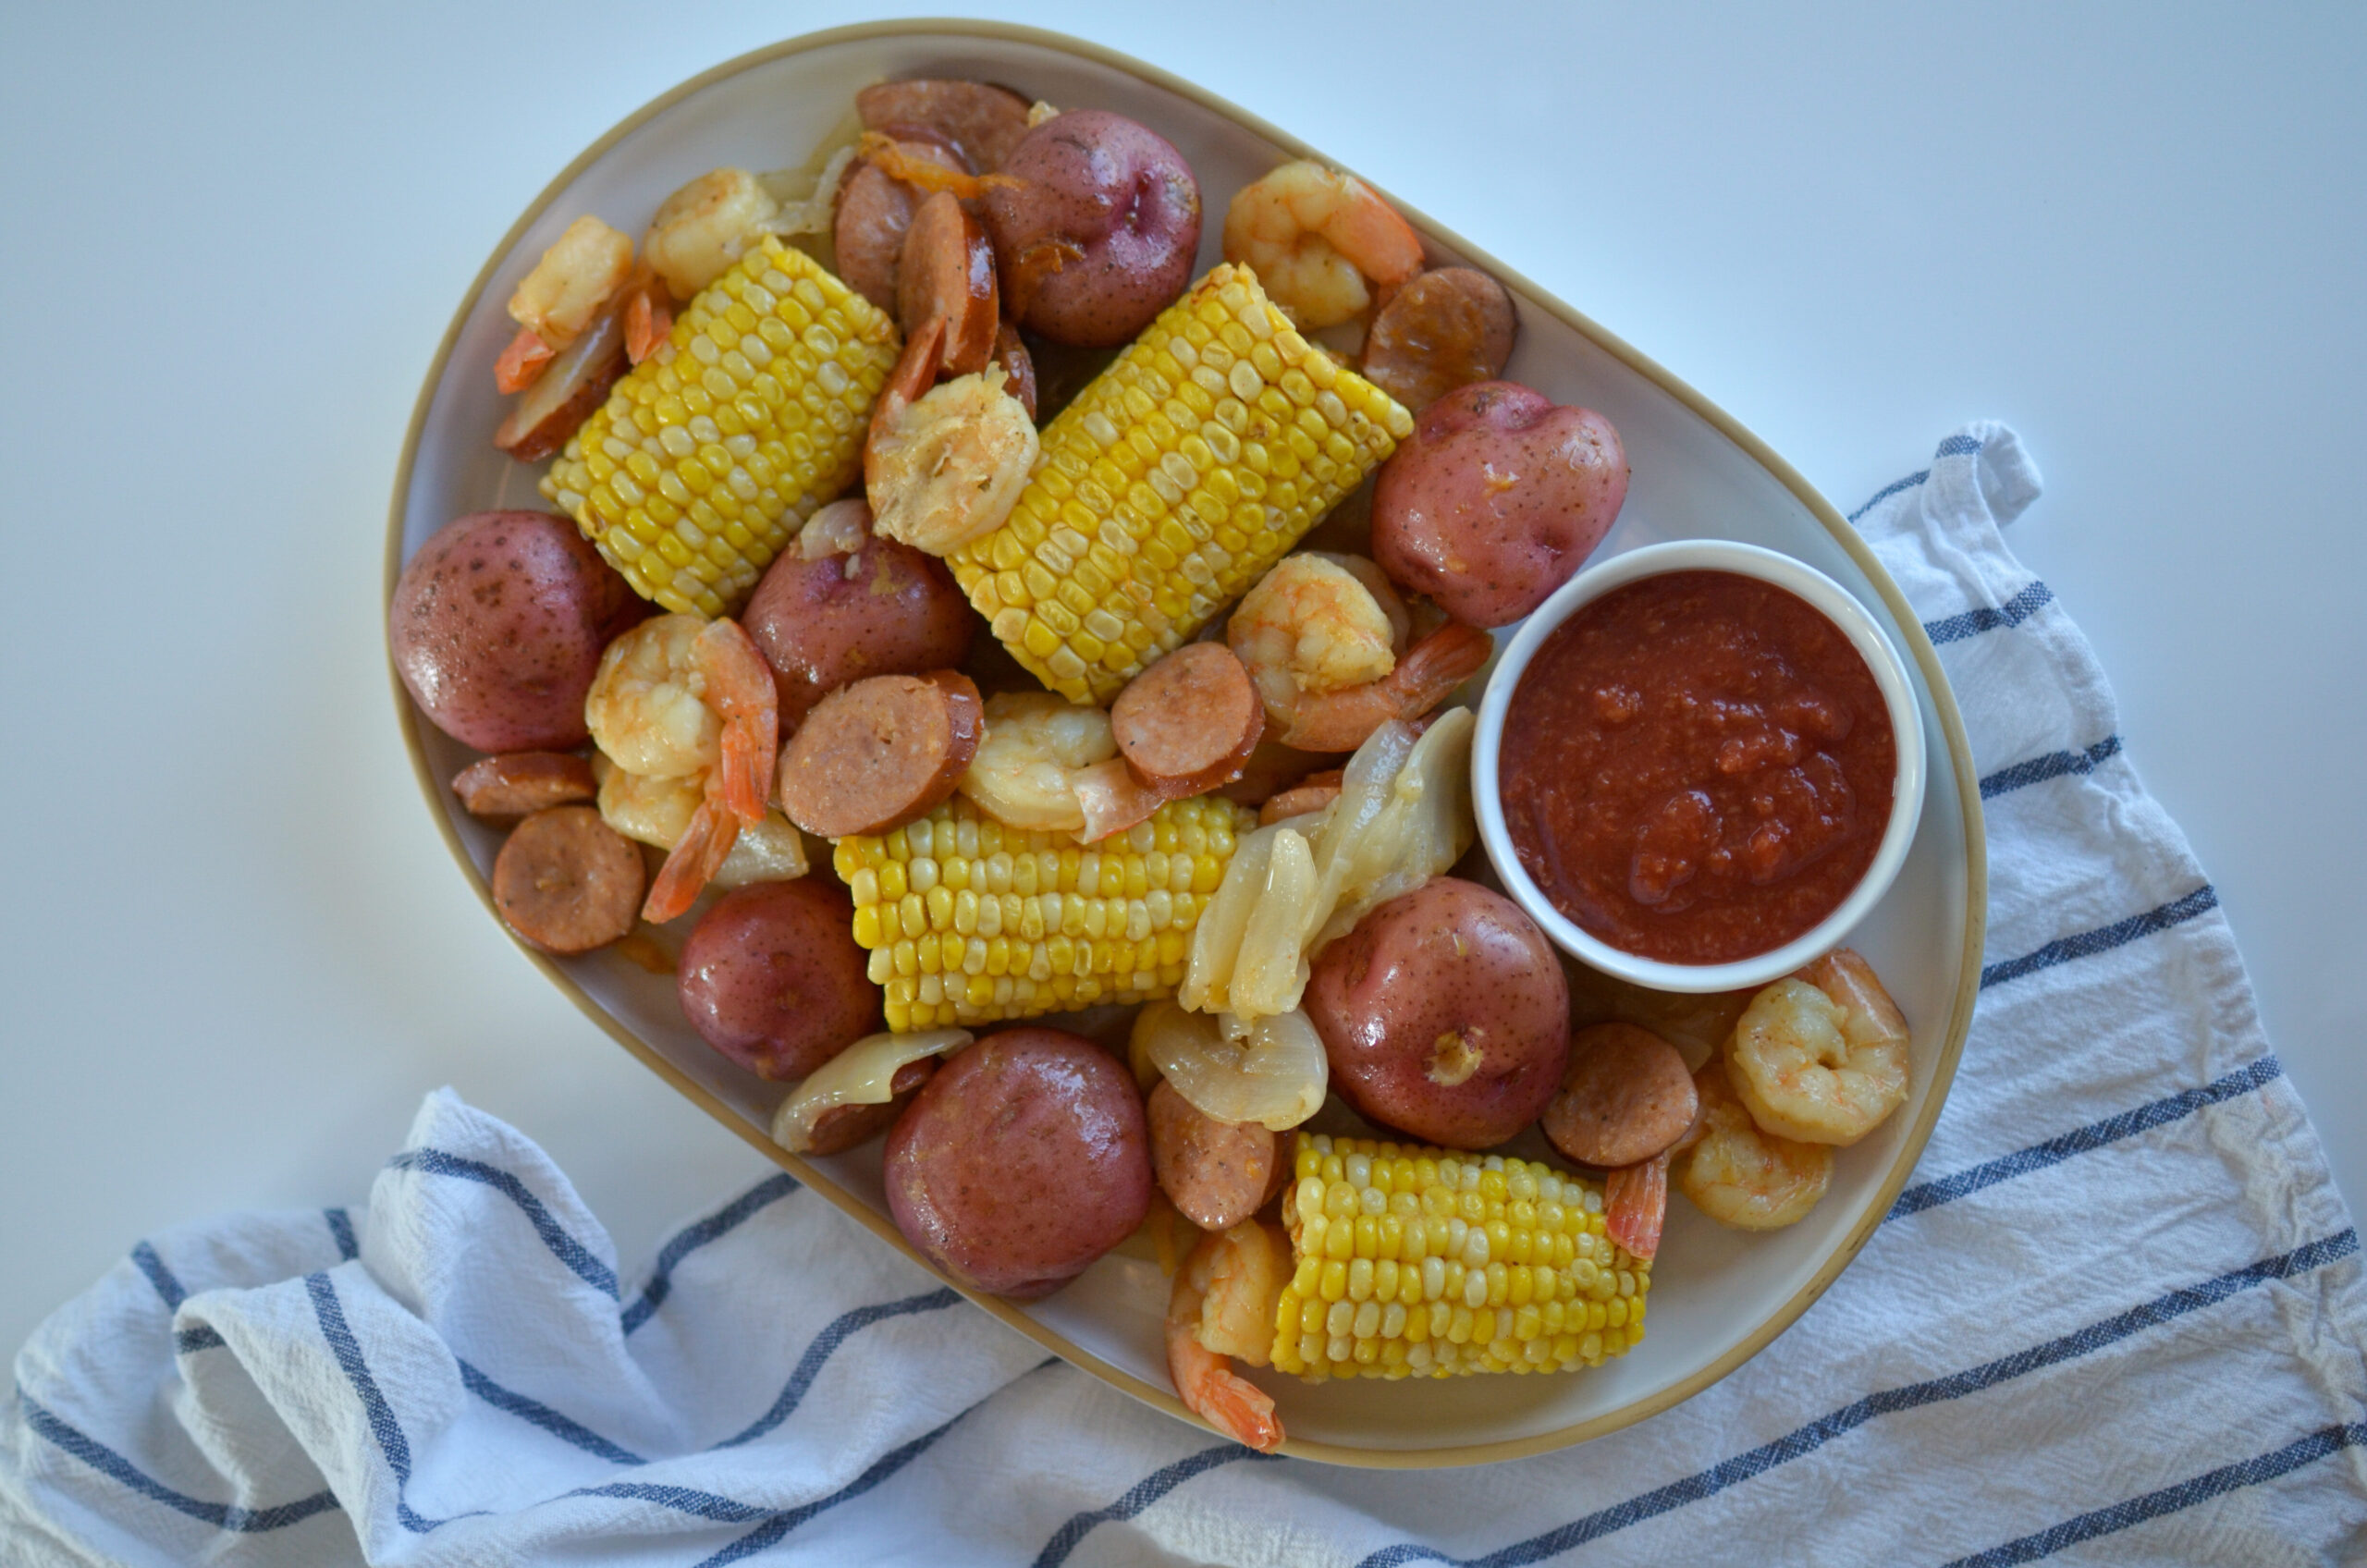 Whether you’re on the coast or spending an evening at home, there’s something about the summer breeze that beckons a low-country boil.